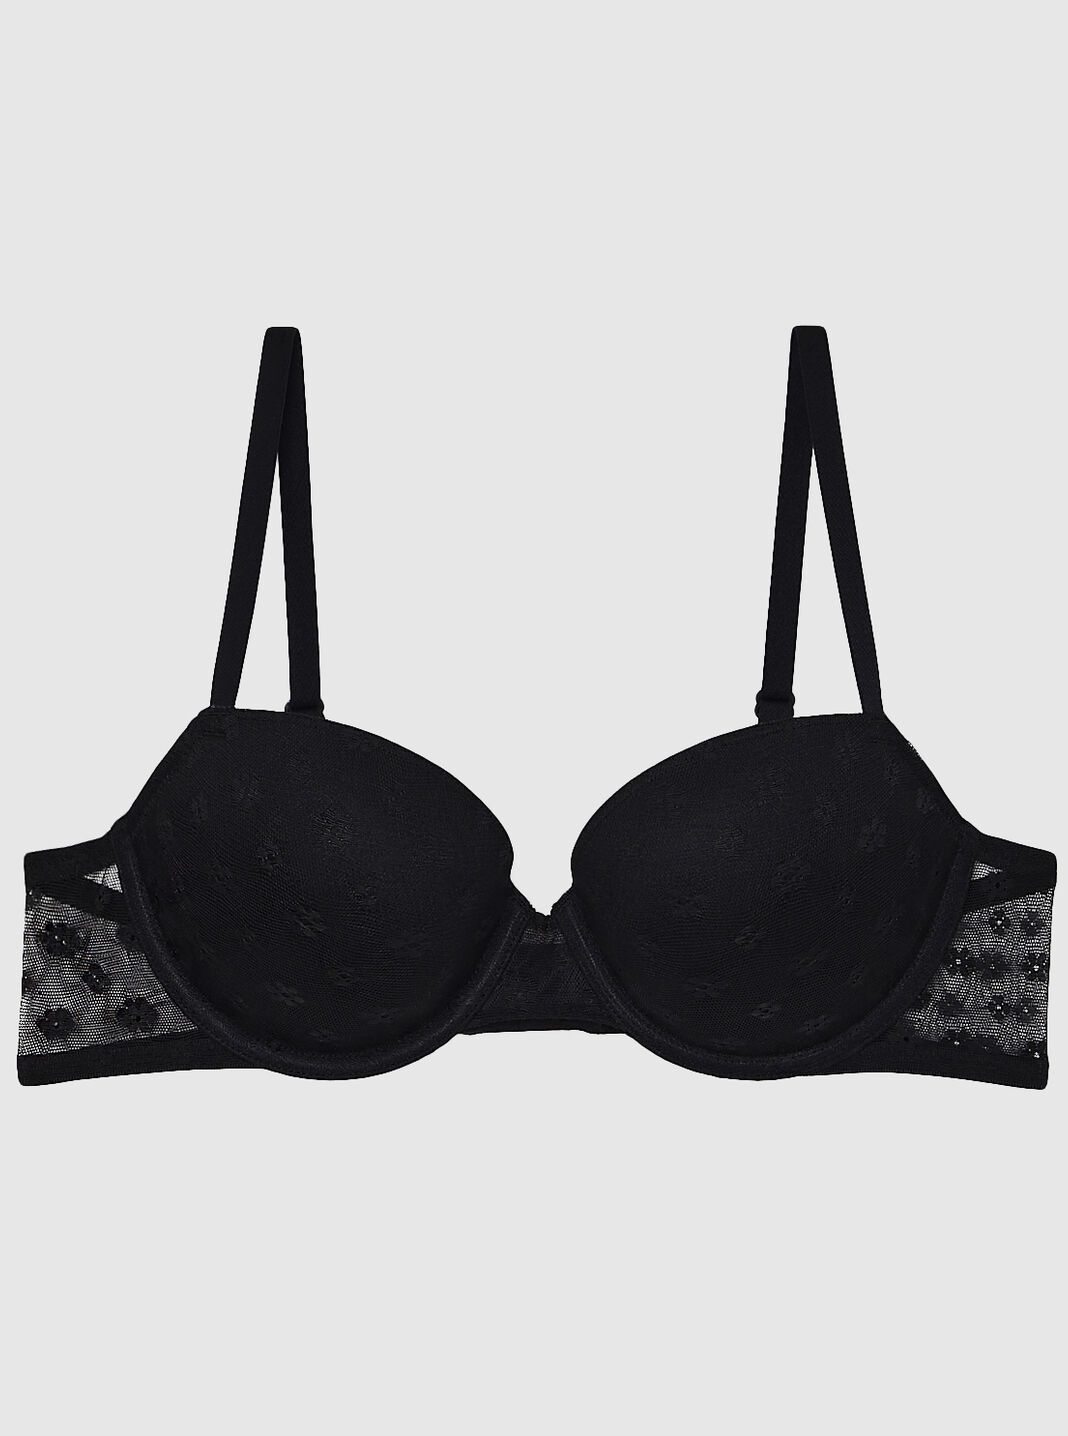 Buy Womens Cotton D Cup Non Wired Non Padded T Shirt Bra - Size 32D, 34D,  36D, 38D, 40D, 42D & 44D - Full Cup Coverage Brasier Available in Black,  White 